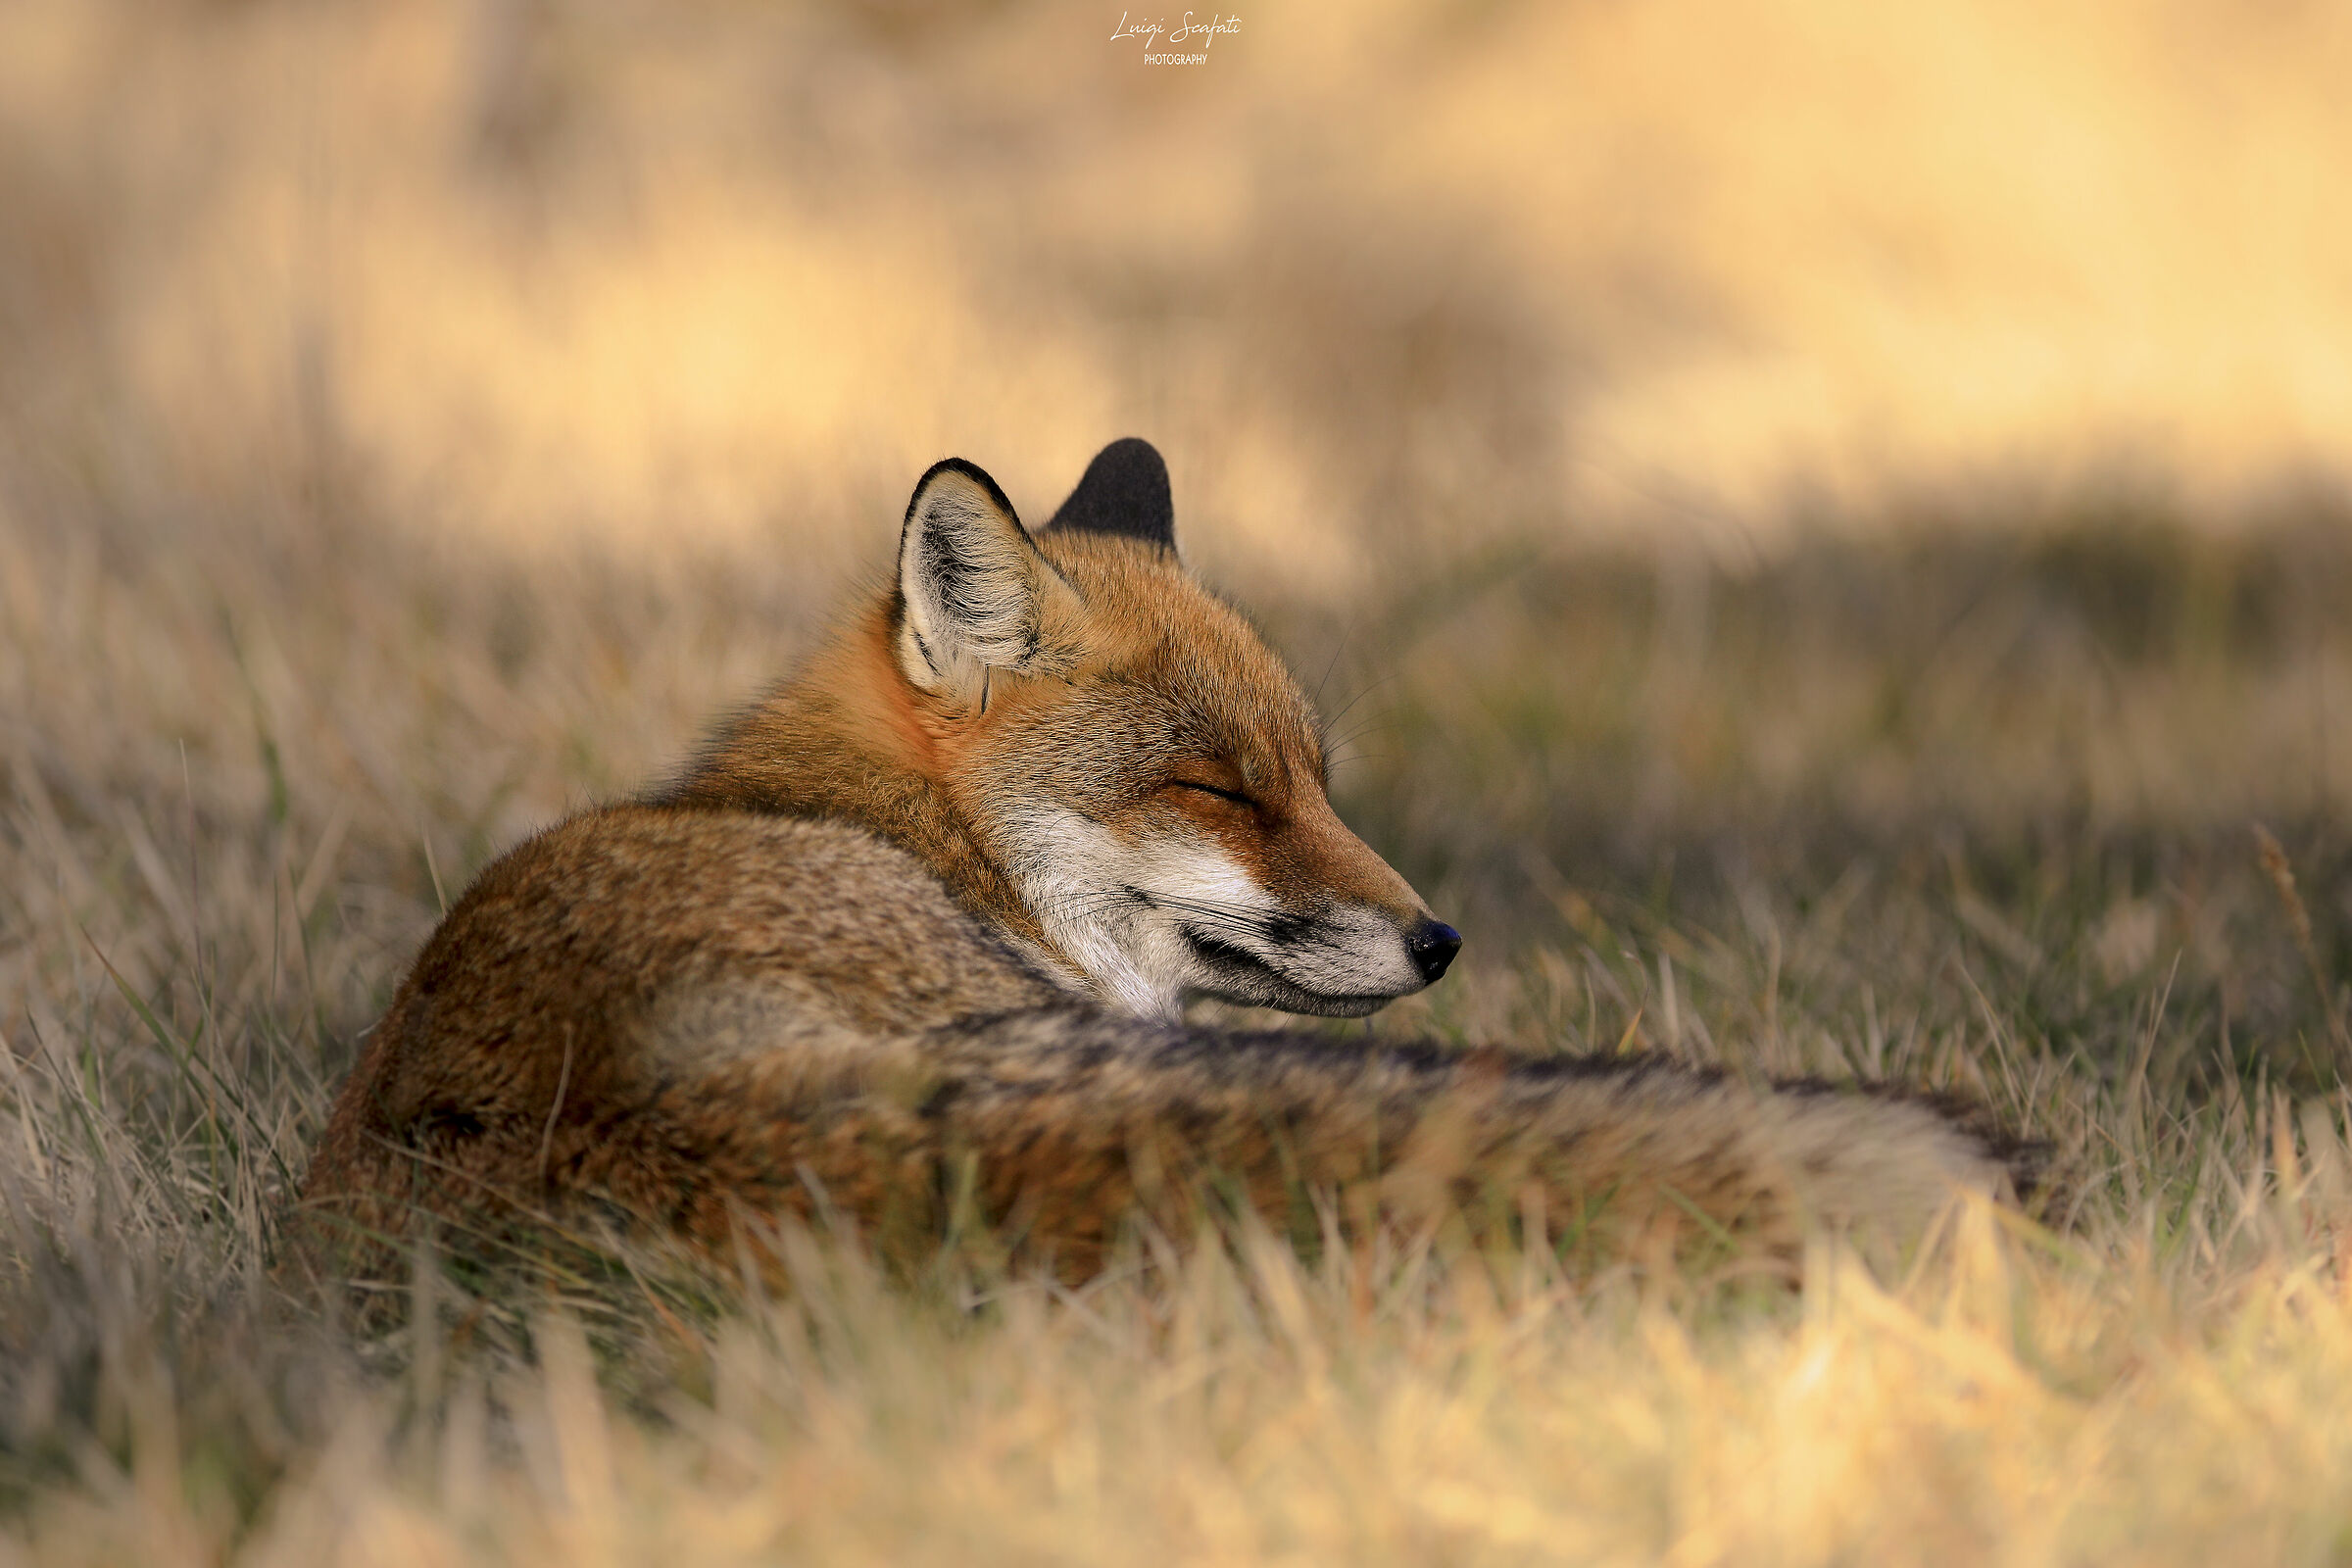 Fox in the world of dreams...